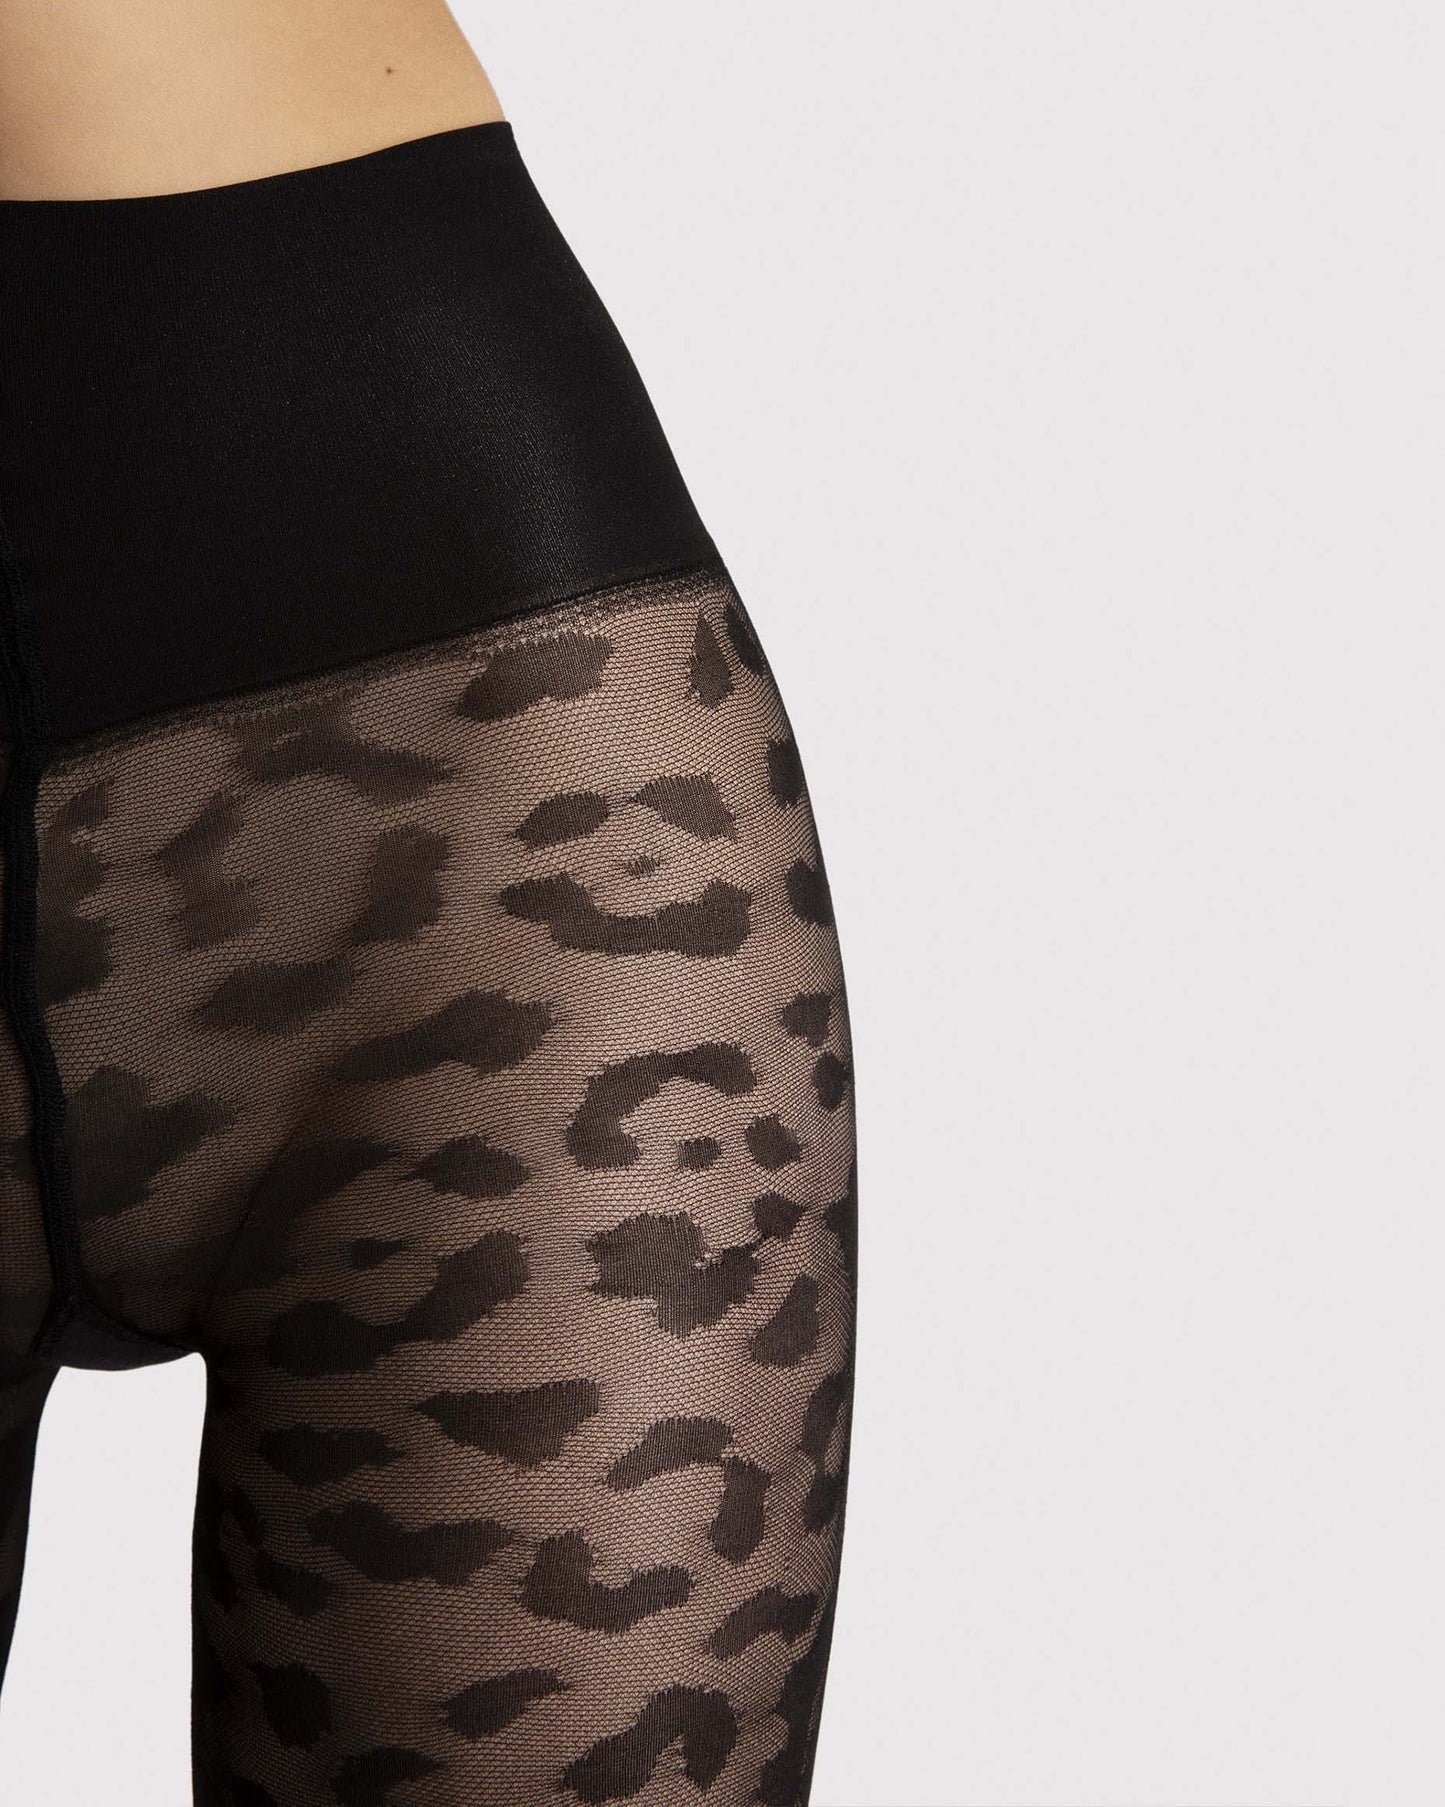 Fiore Echo Leopard Tights - Black micro mesh semi-sheer fashion tights with a woven panther animal print style pattern with a extra deep slimming waist band. Close up detail.